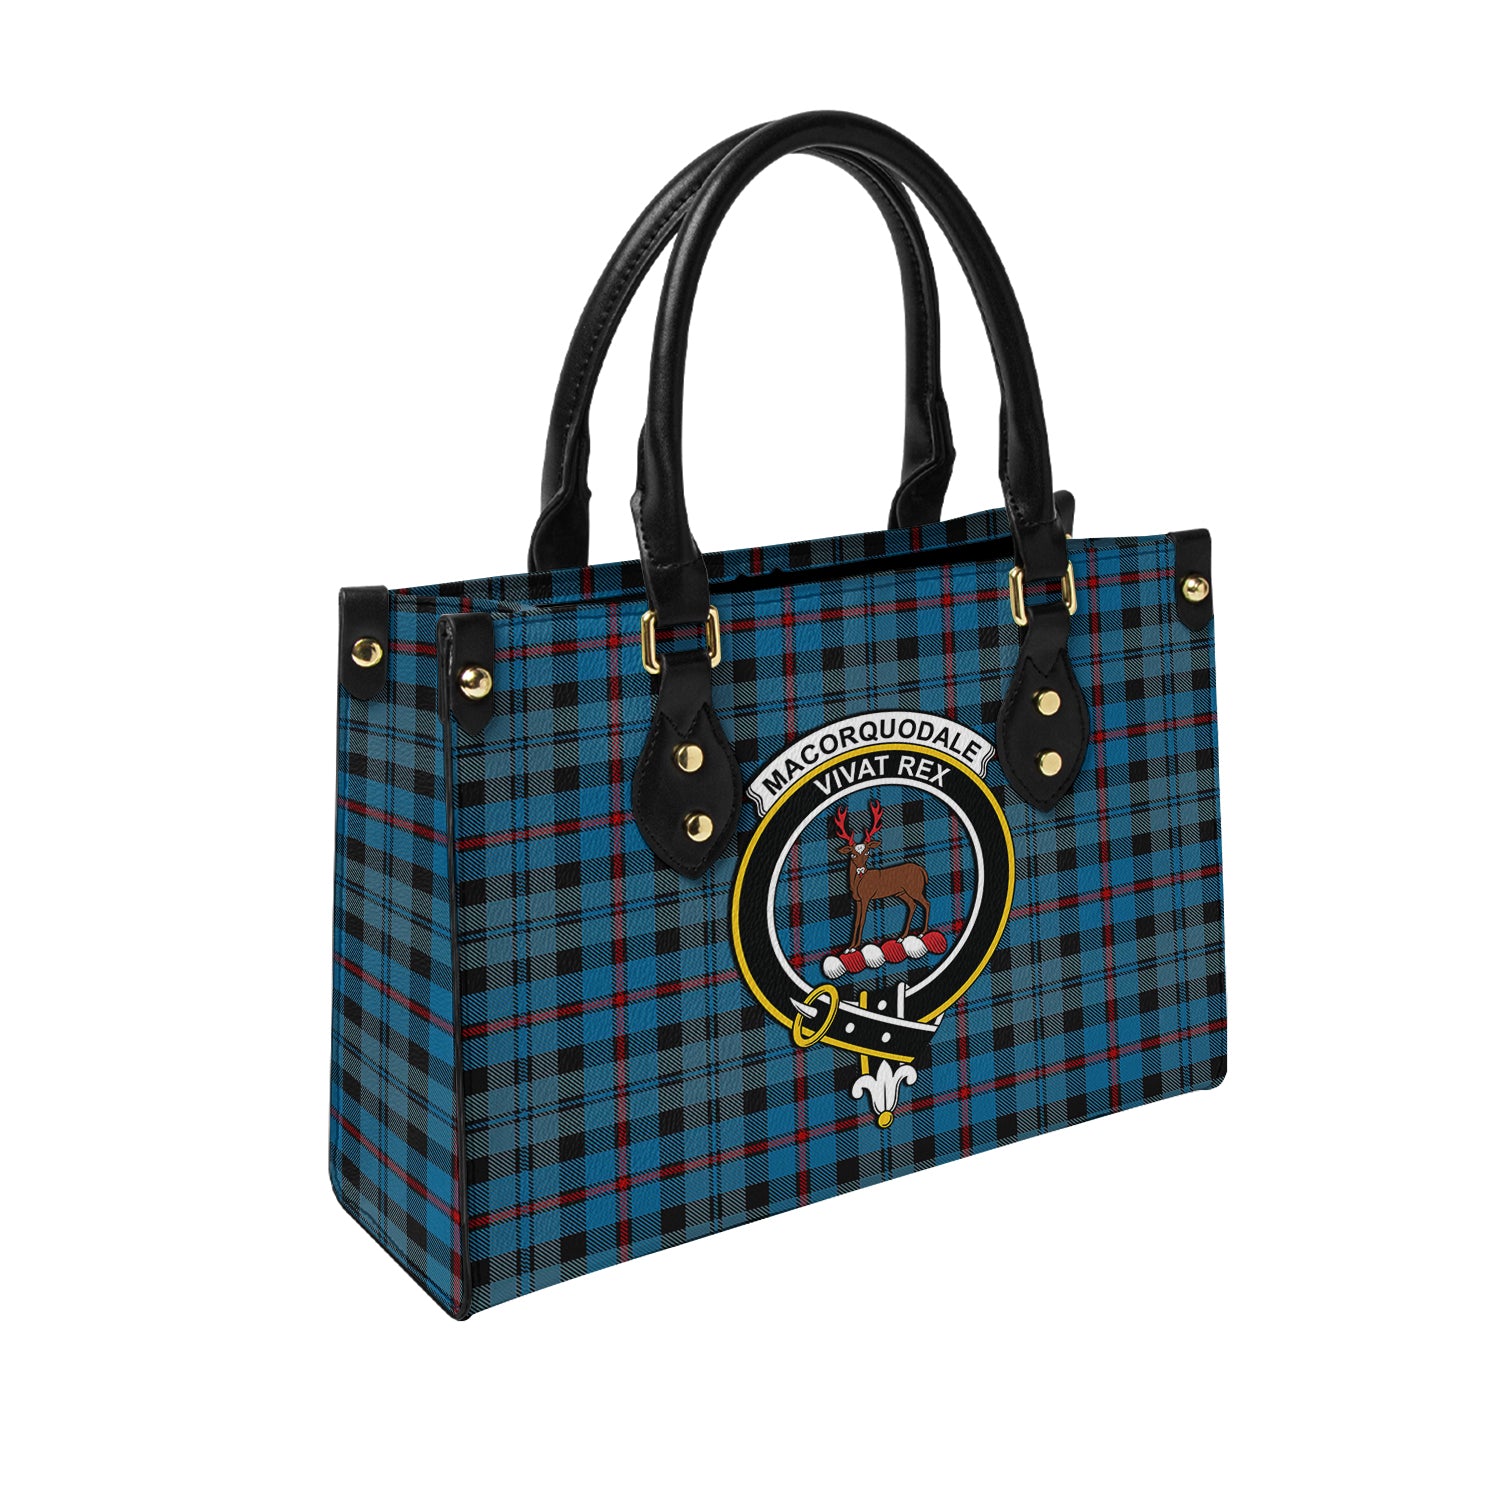 maccorquodale-tartan-leather-bag-with-family-crest